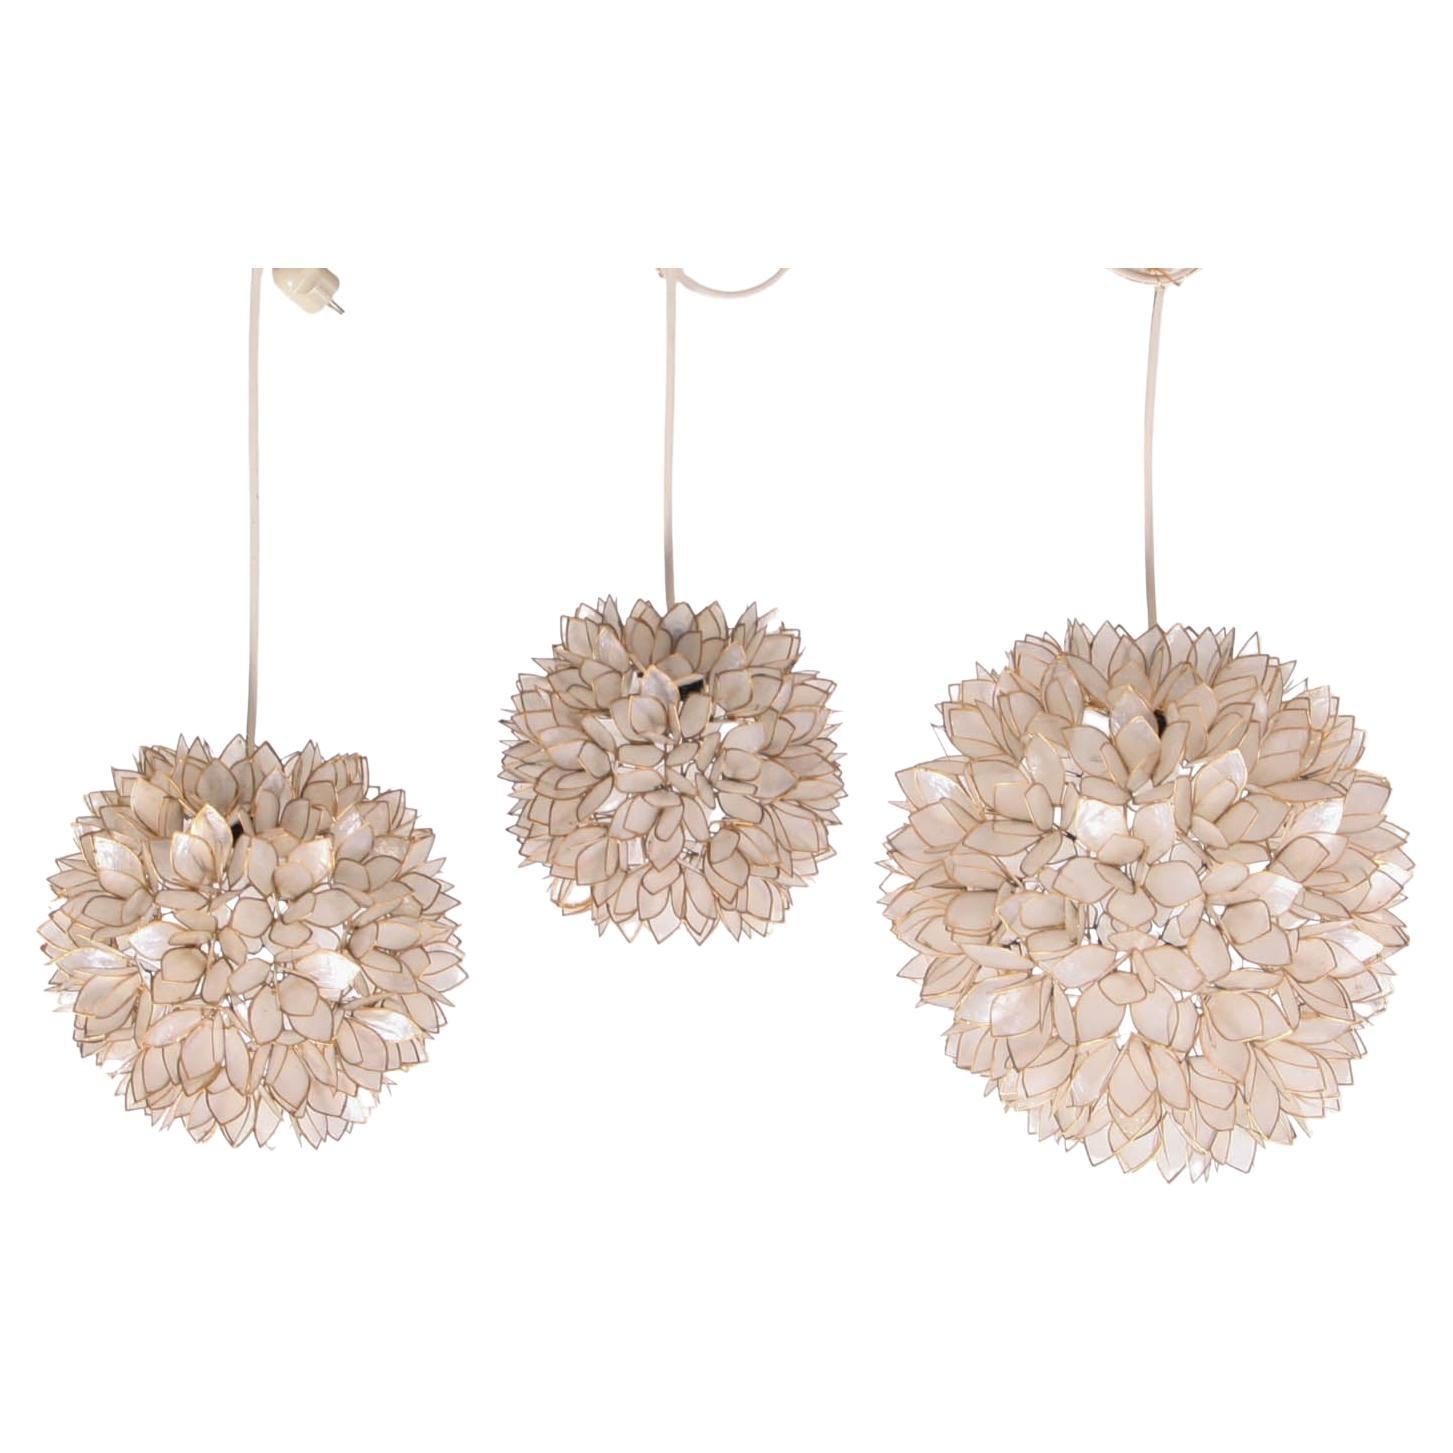 Set of Mother-of-pearl and gilded metal pendant lights